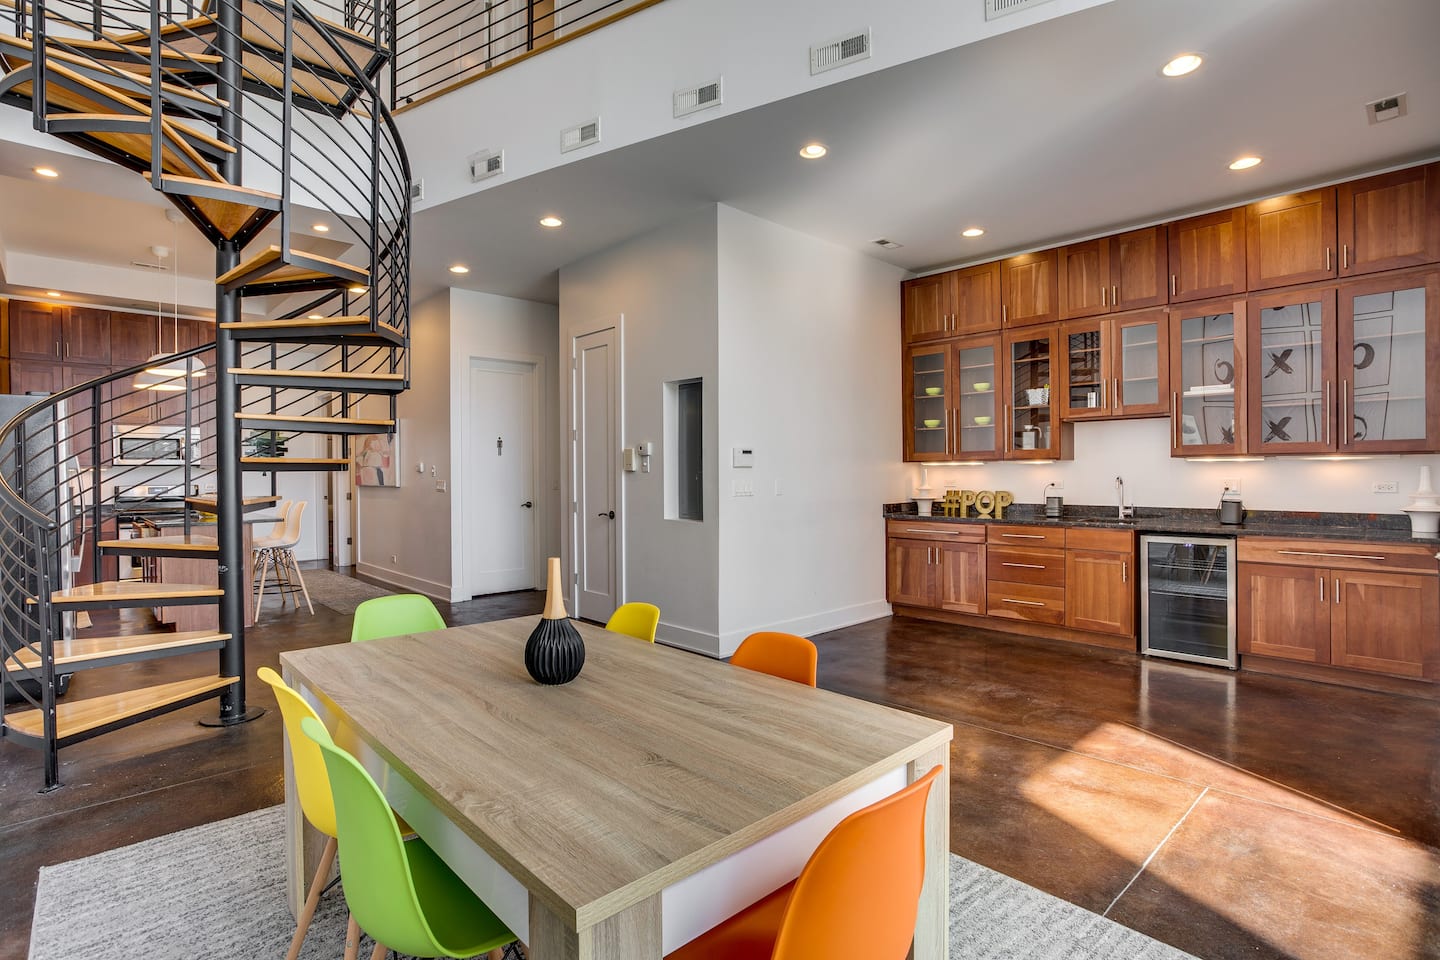 Fulton market condo, one of the best Airbnbs in Chicago